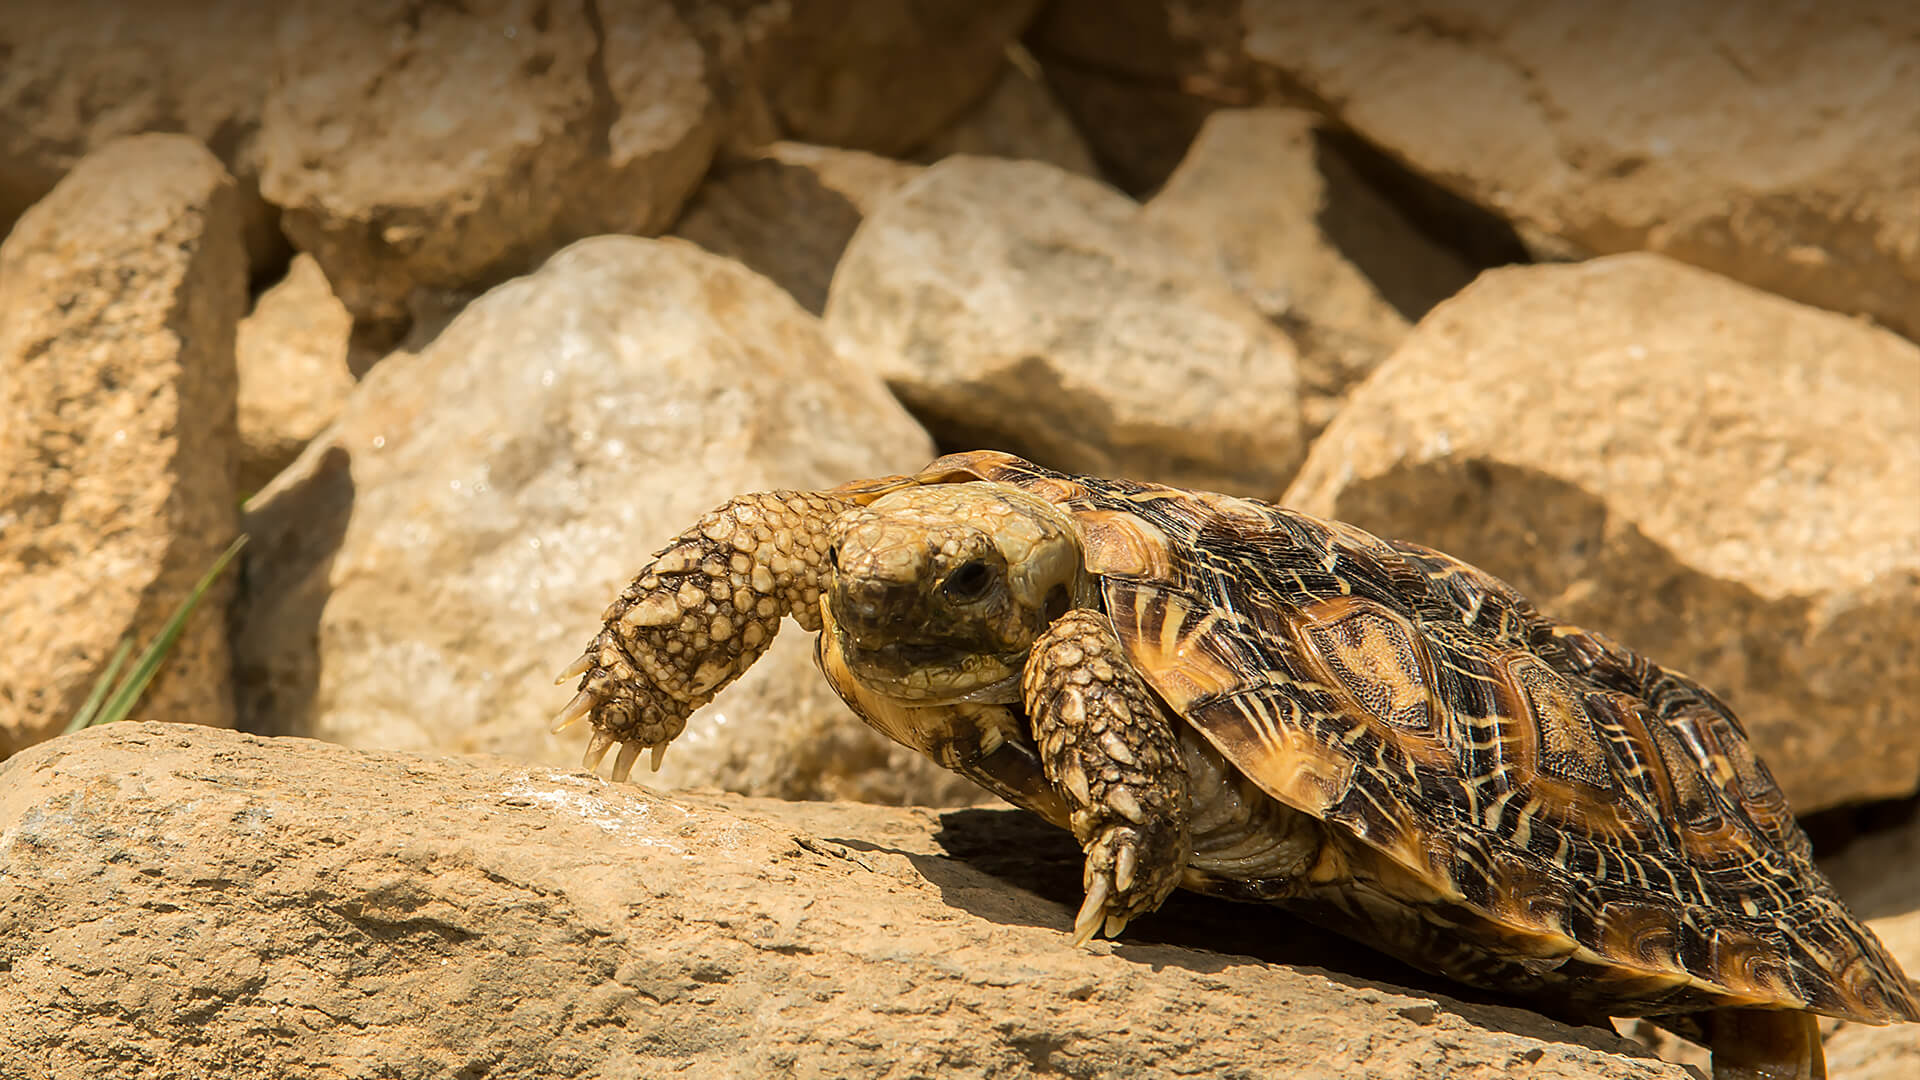 A pancake tortoise was across a dirt covered rock.